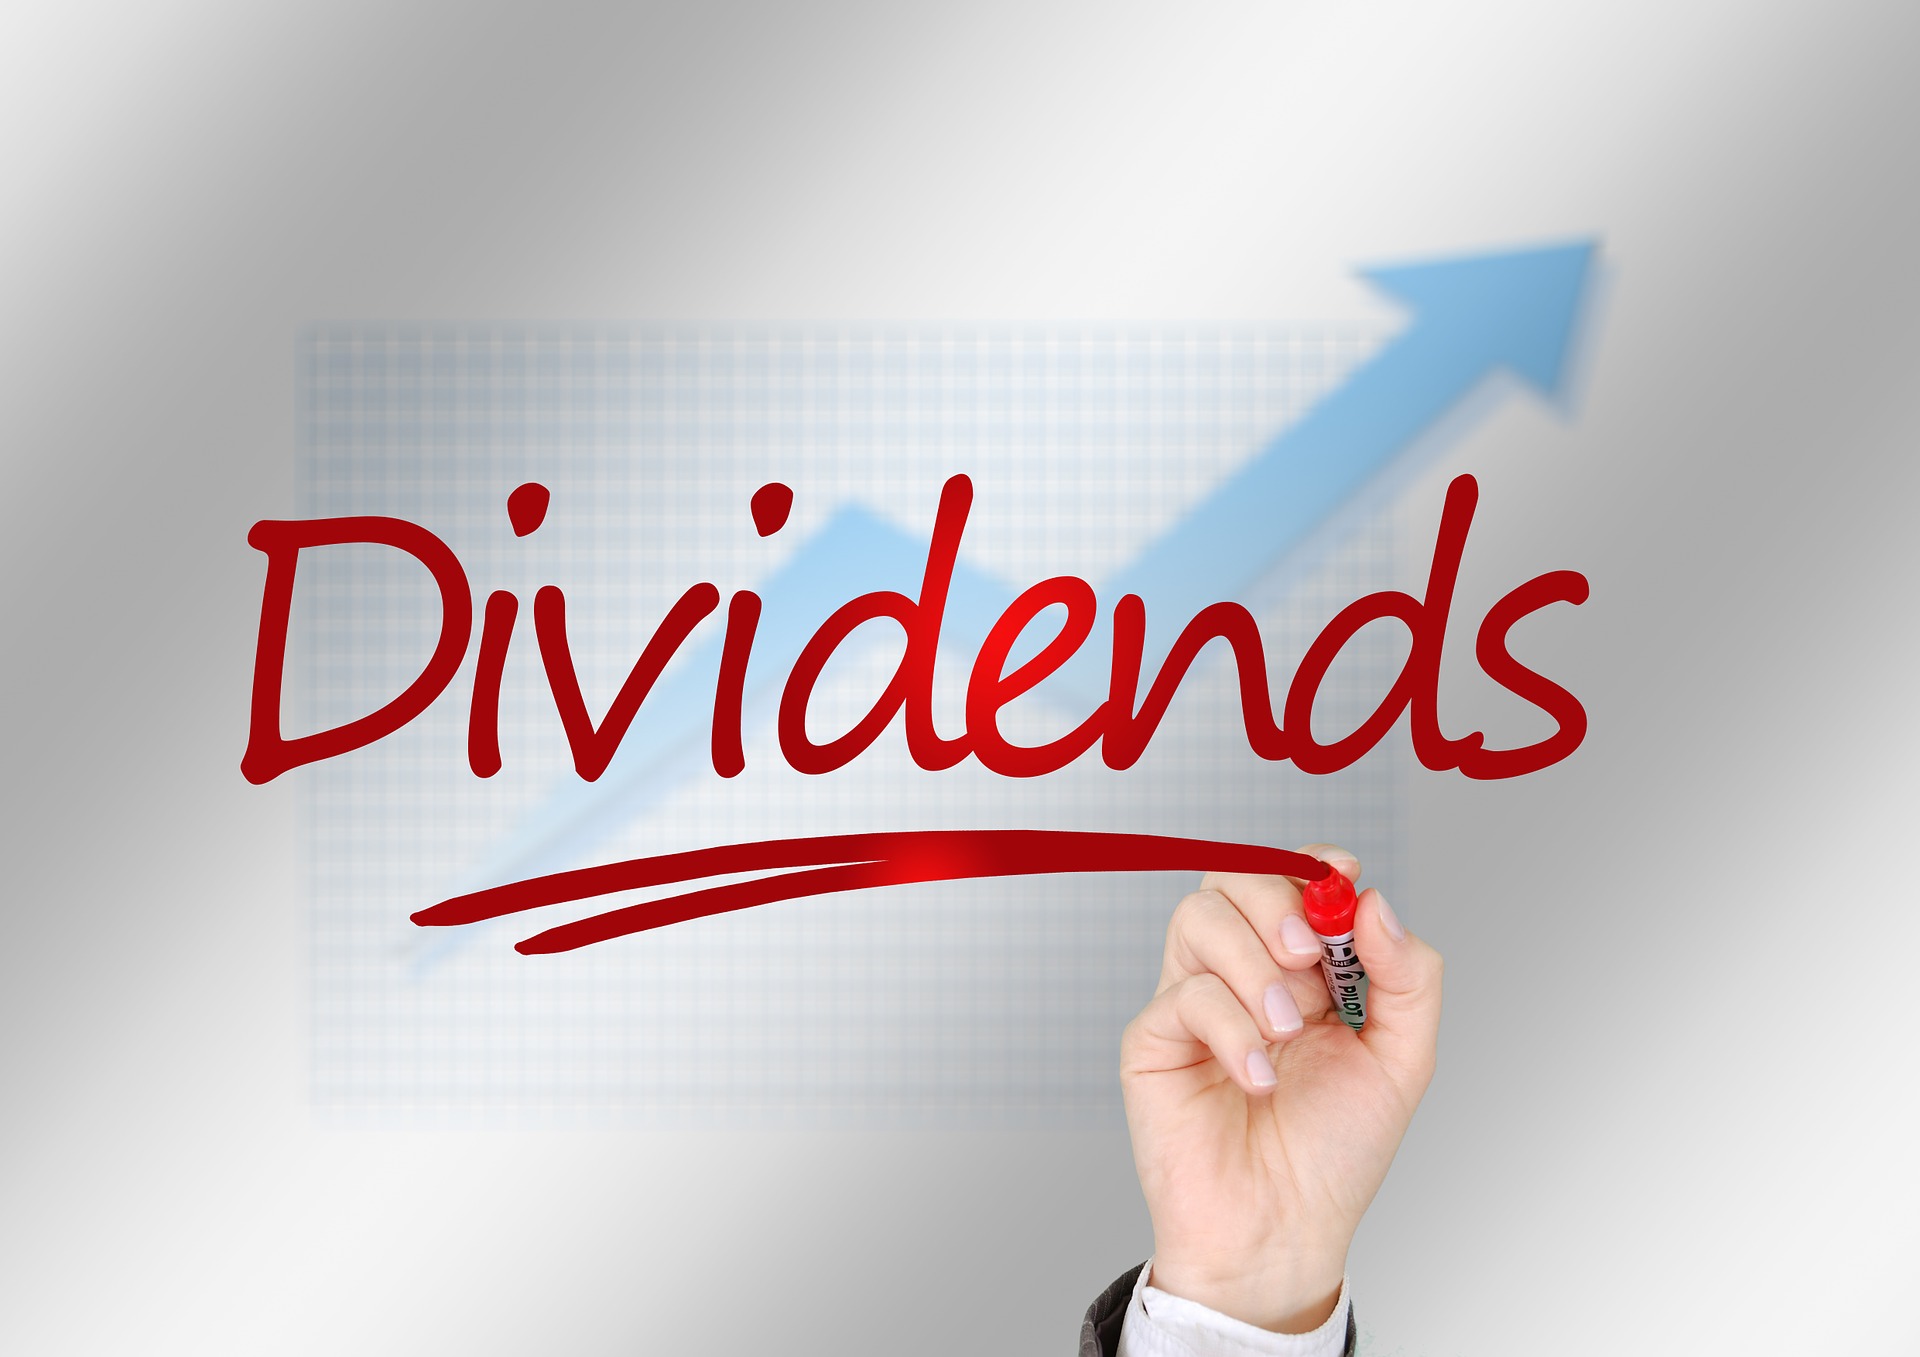 Economic uncertainty driving investors to dividend paying stocks